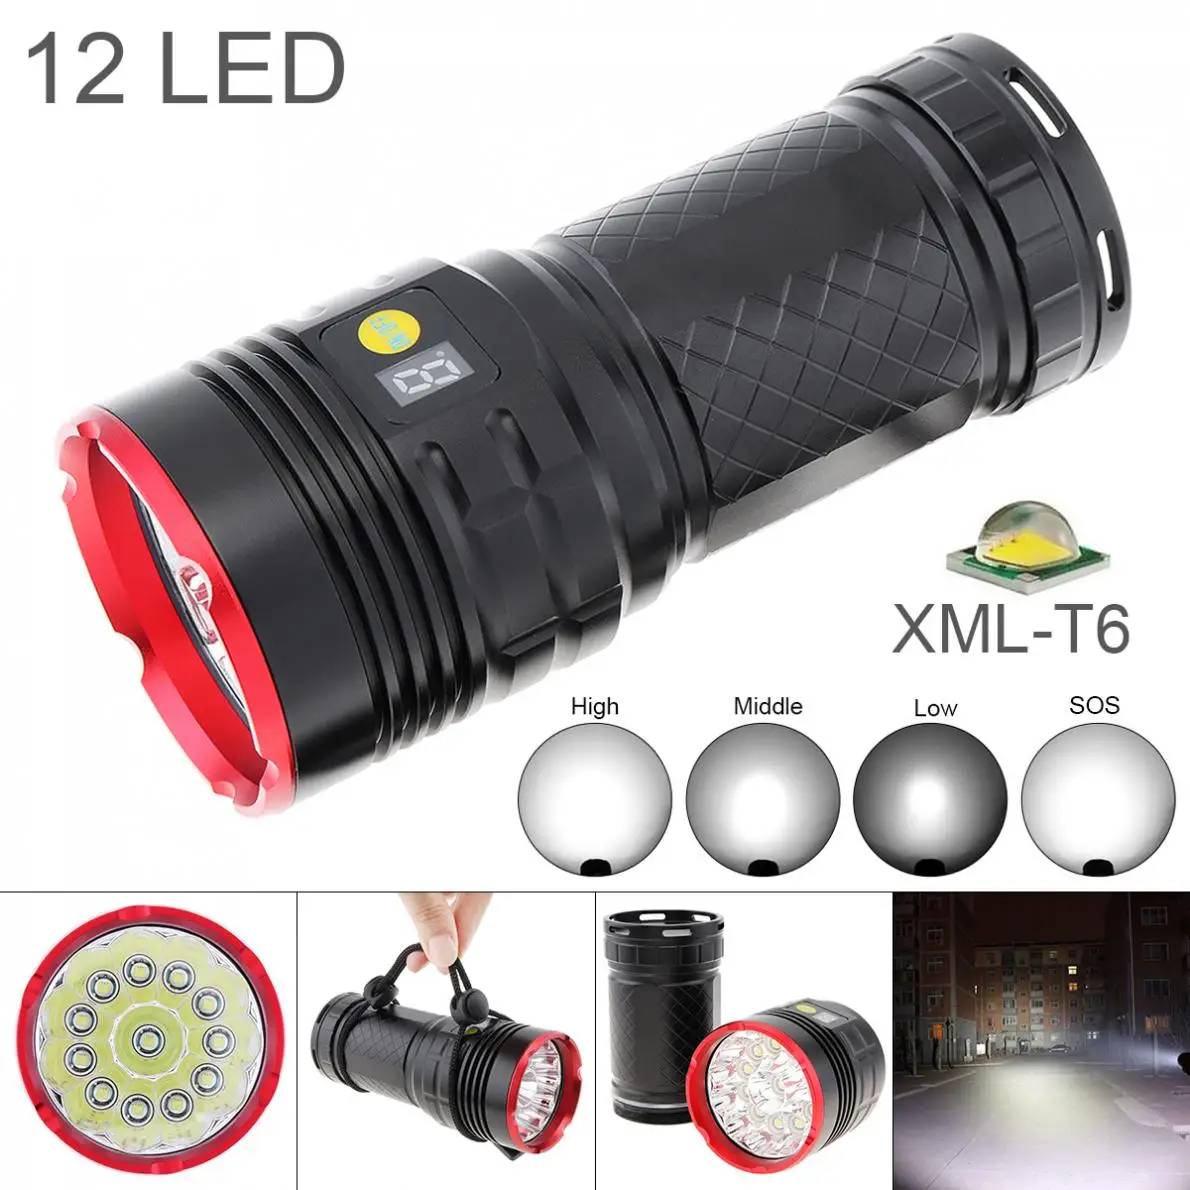 

Waterproof Power Display 7500 Lumens 12 x XML T6 LED Flashlight Spotlight Lamp Torch with 4 Modes for Outdoor Hunting/Camping